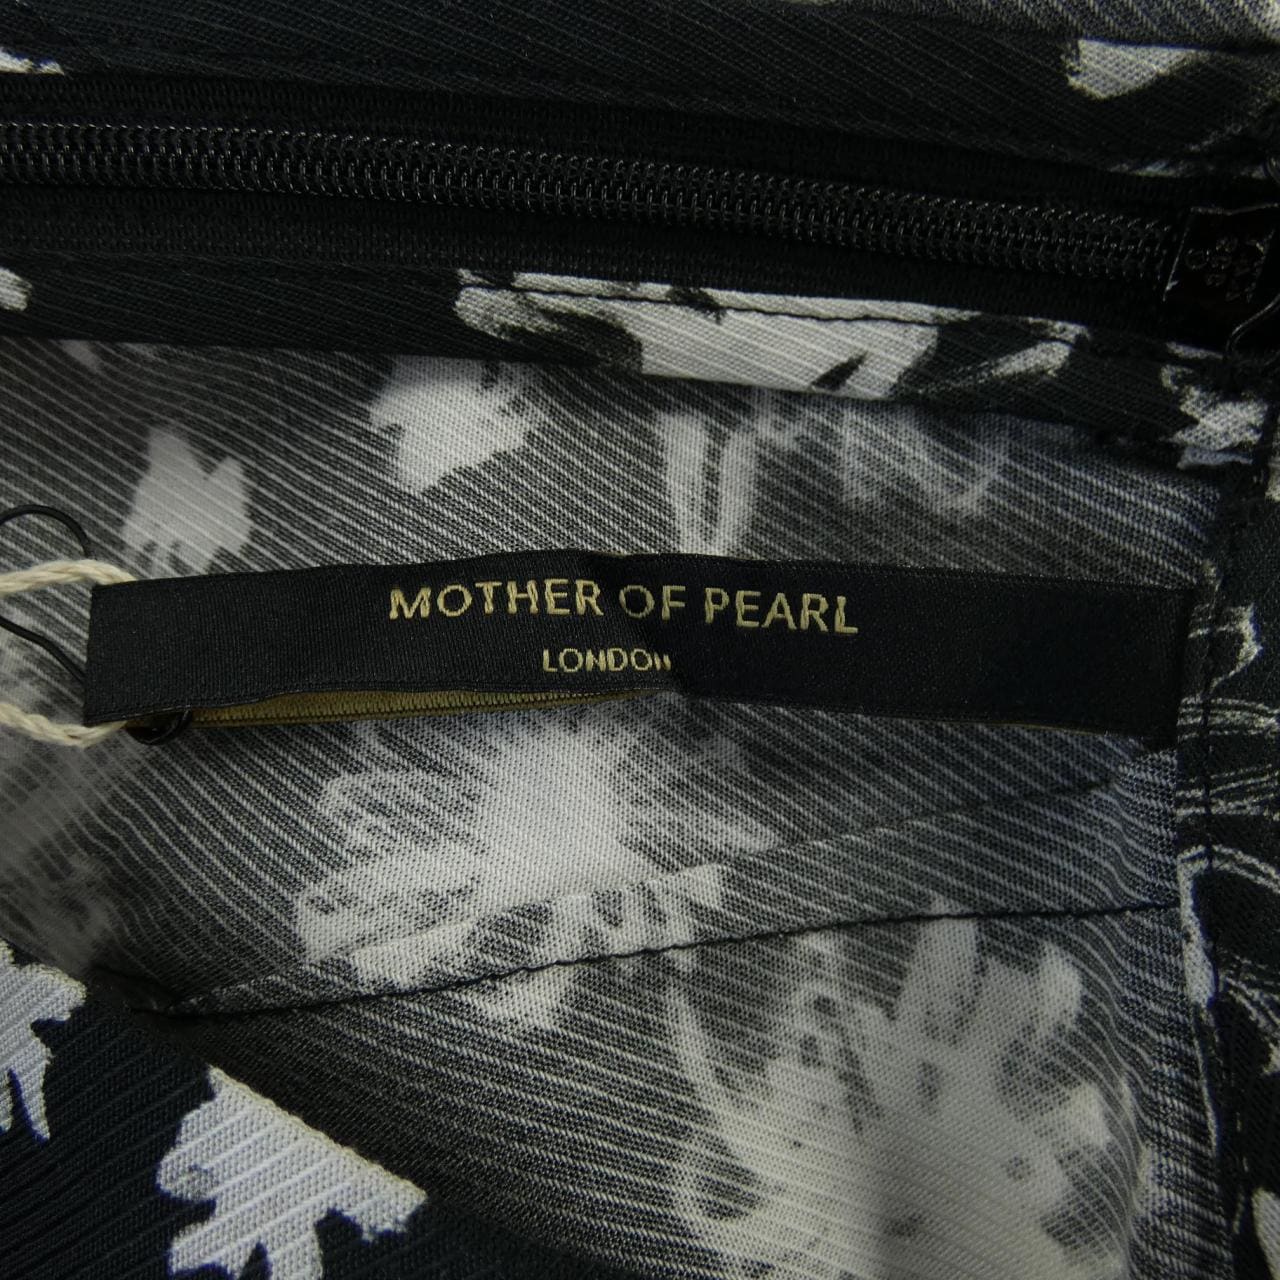 MOTHER OF PEARL连衣裙